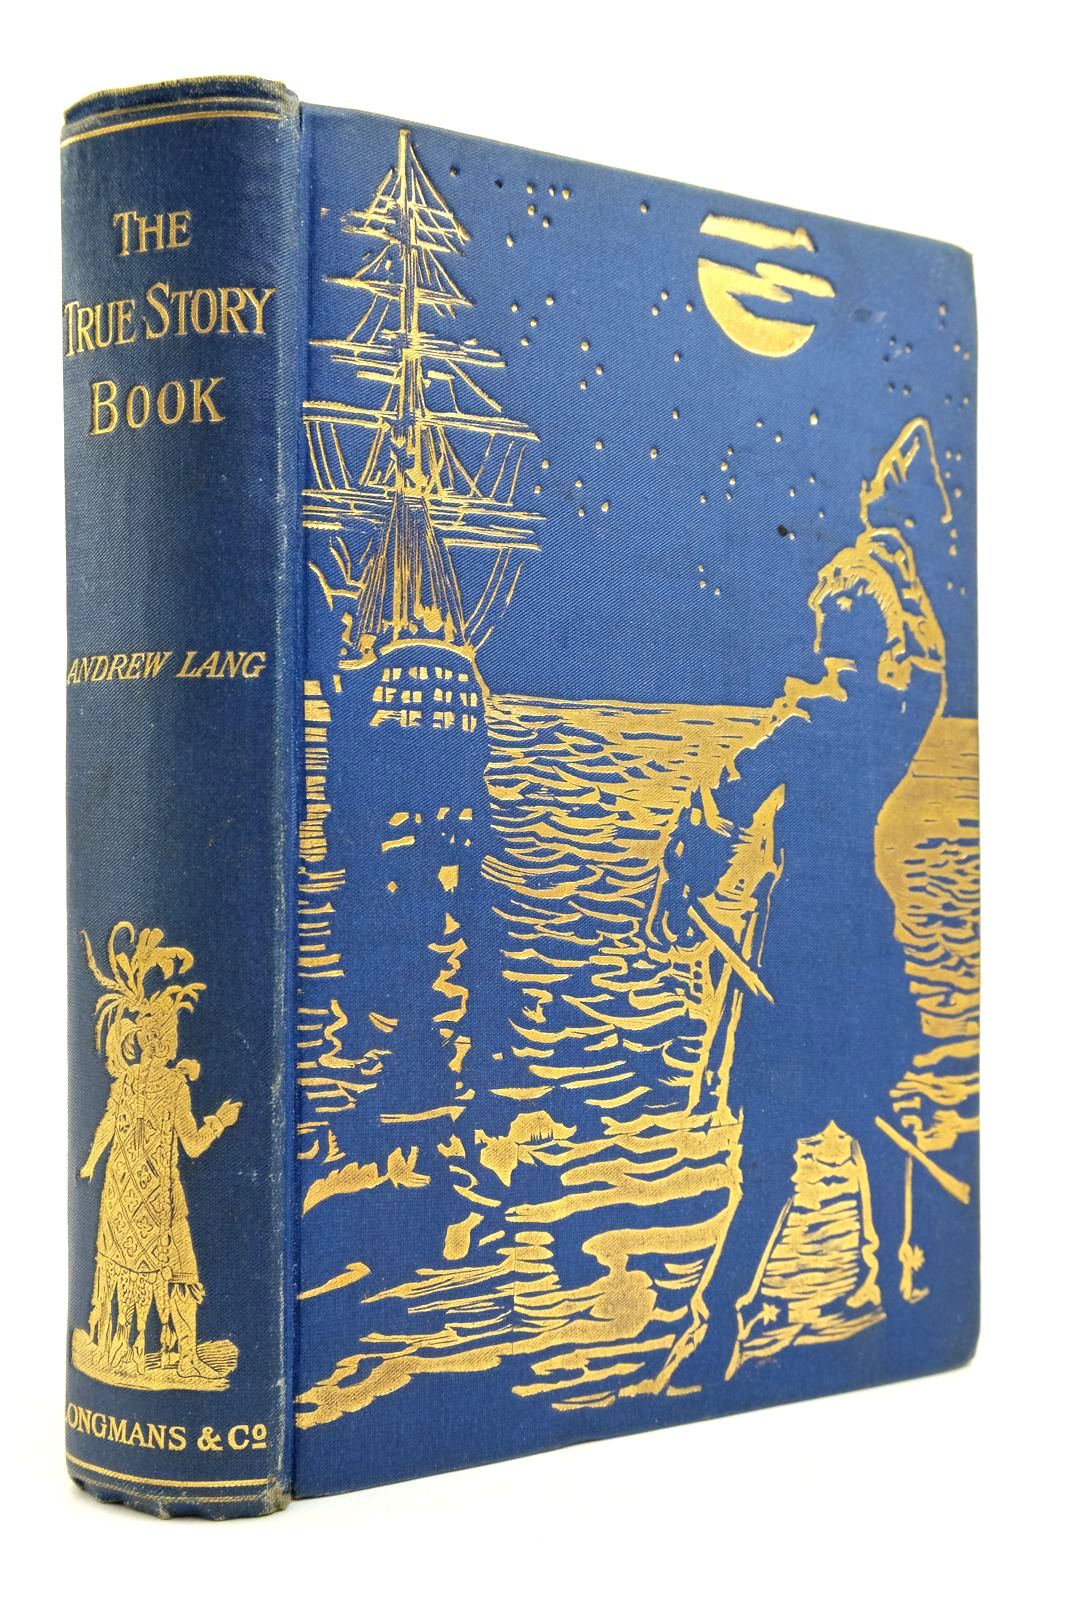 Photo of THE TRUE STORY BOOK written by Lang, Andrew illustrated by Bogle, Lockhart Davis, Lucien Ford, H.J. Kerr, C. H. M. Speed, Lancelot published by Longmans, Green &amp; Co. (STOCK CODE: 2140481)  for sale by Stella & Rose's Books